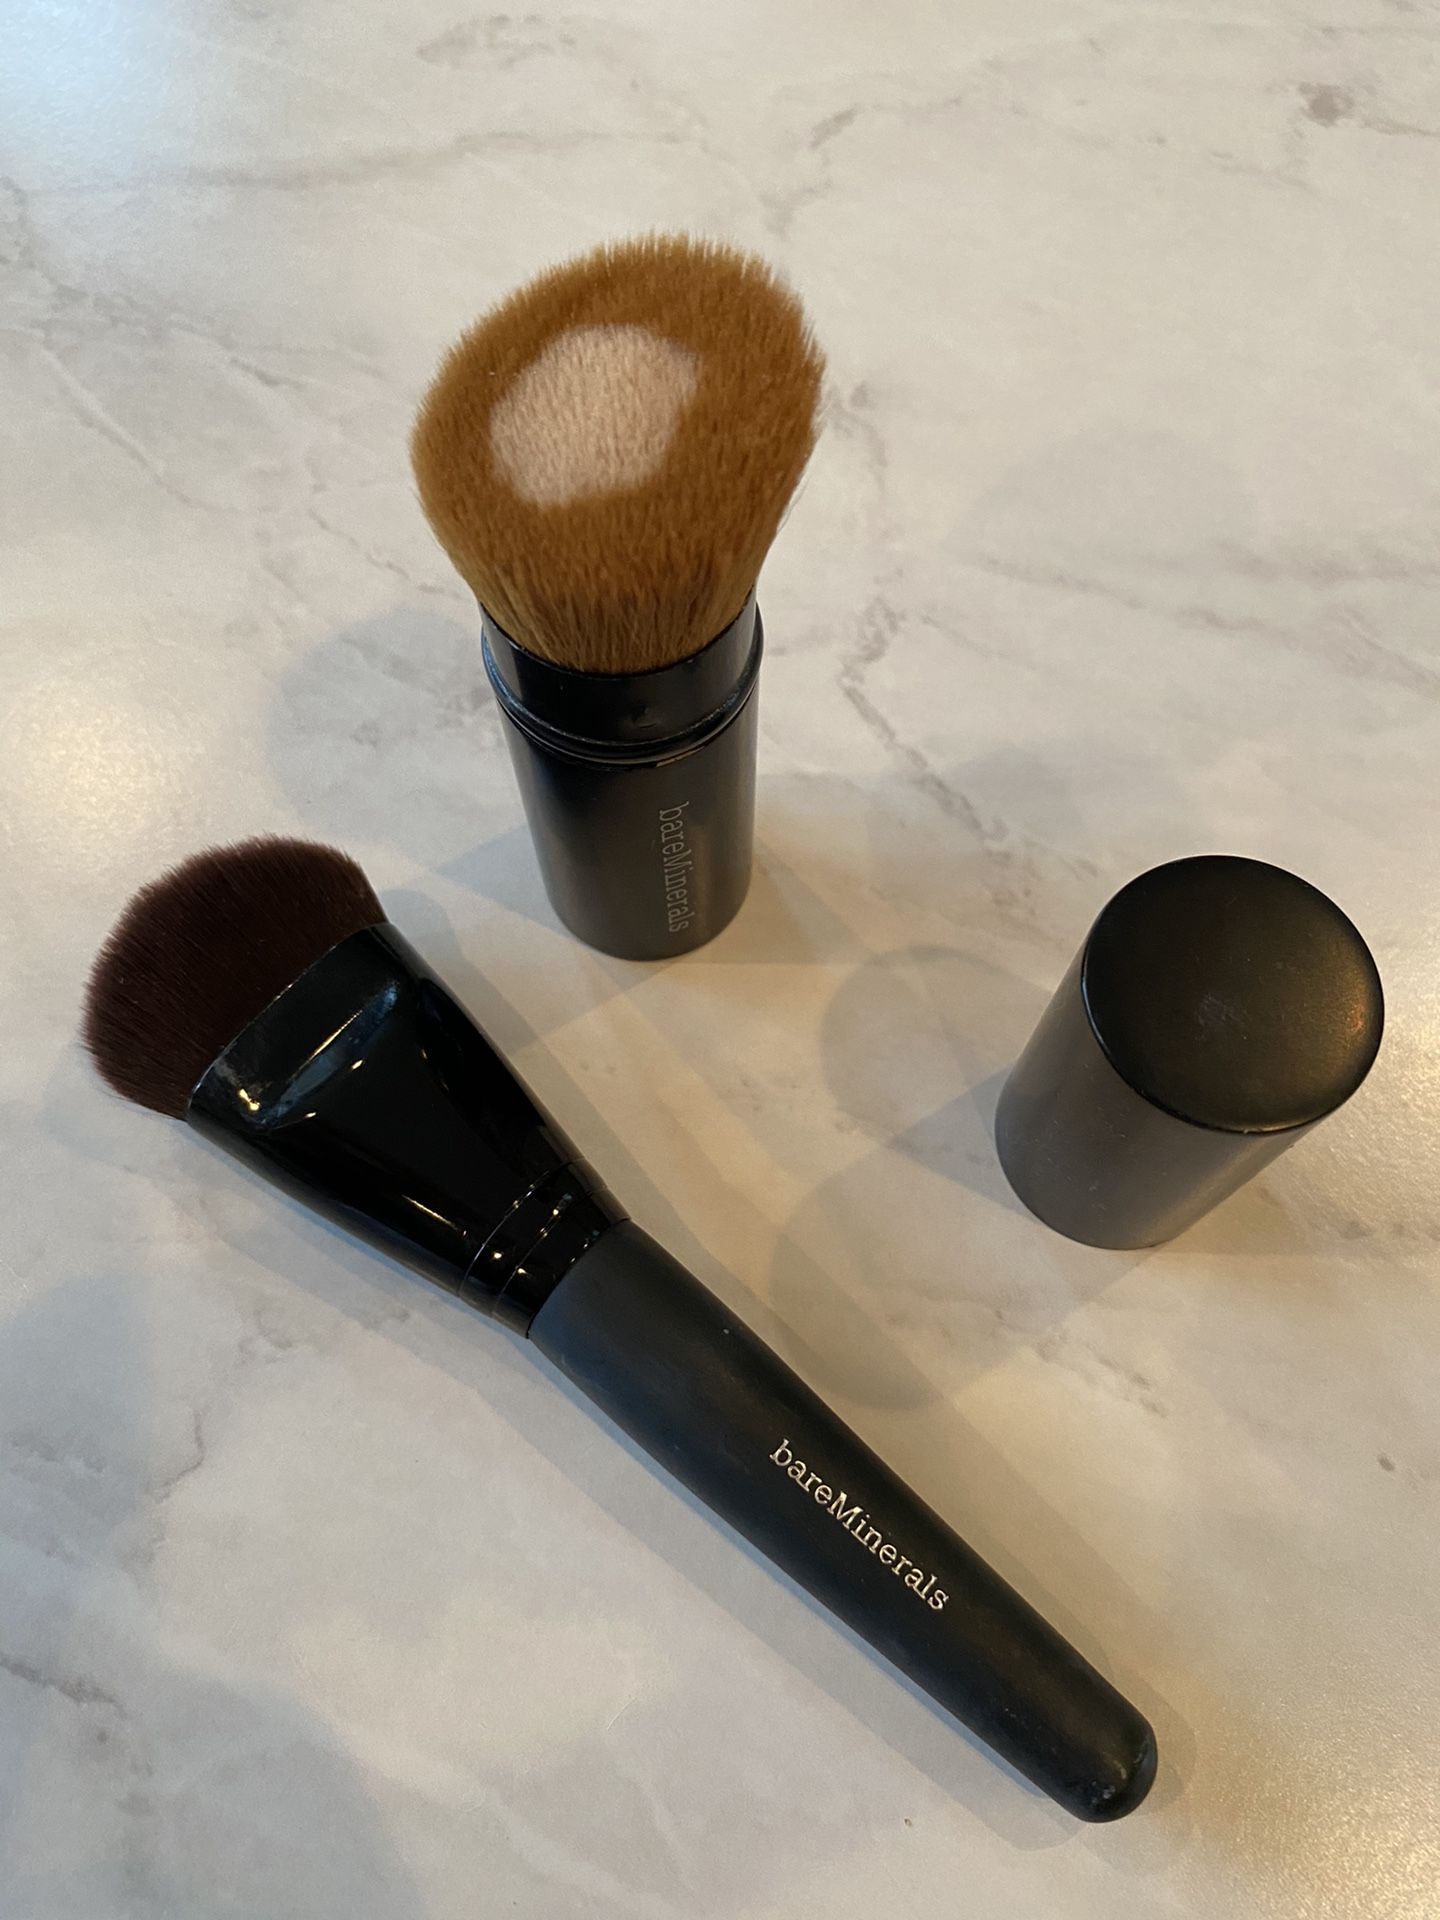 Bare Minerals Makeup Brushes - Brand New!